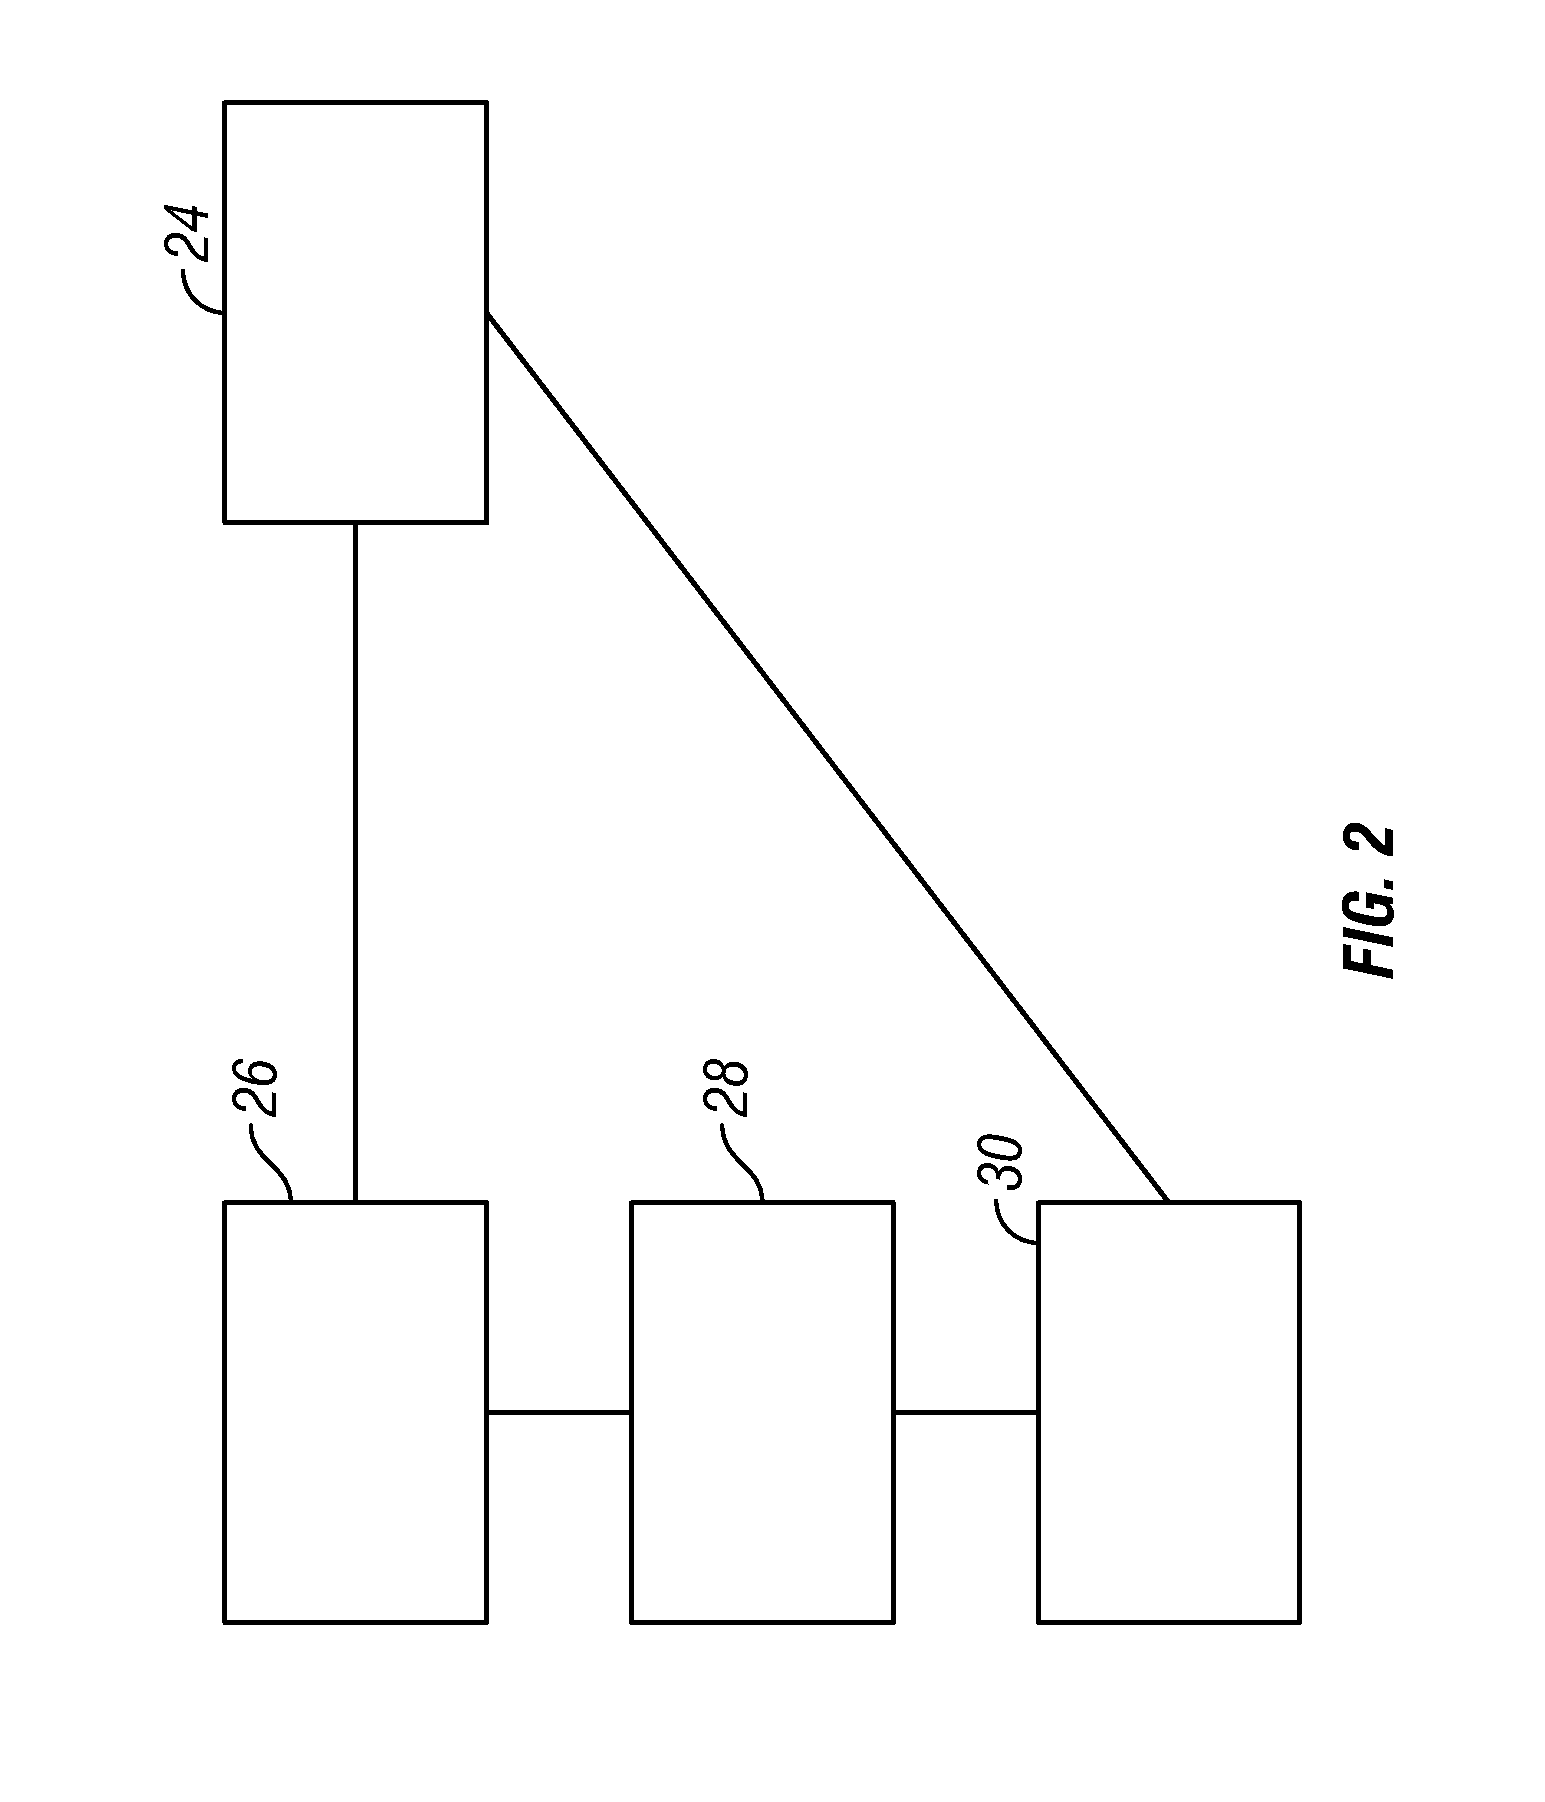 Telemetry system with remote firmware updates or repair for remote monitoring devices when the monitoring device is not in use by the user